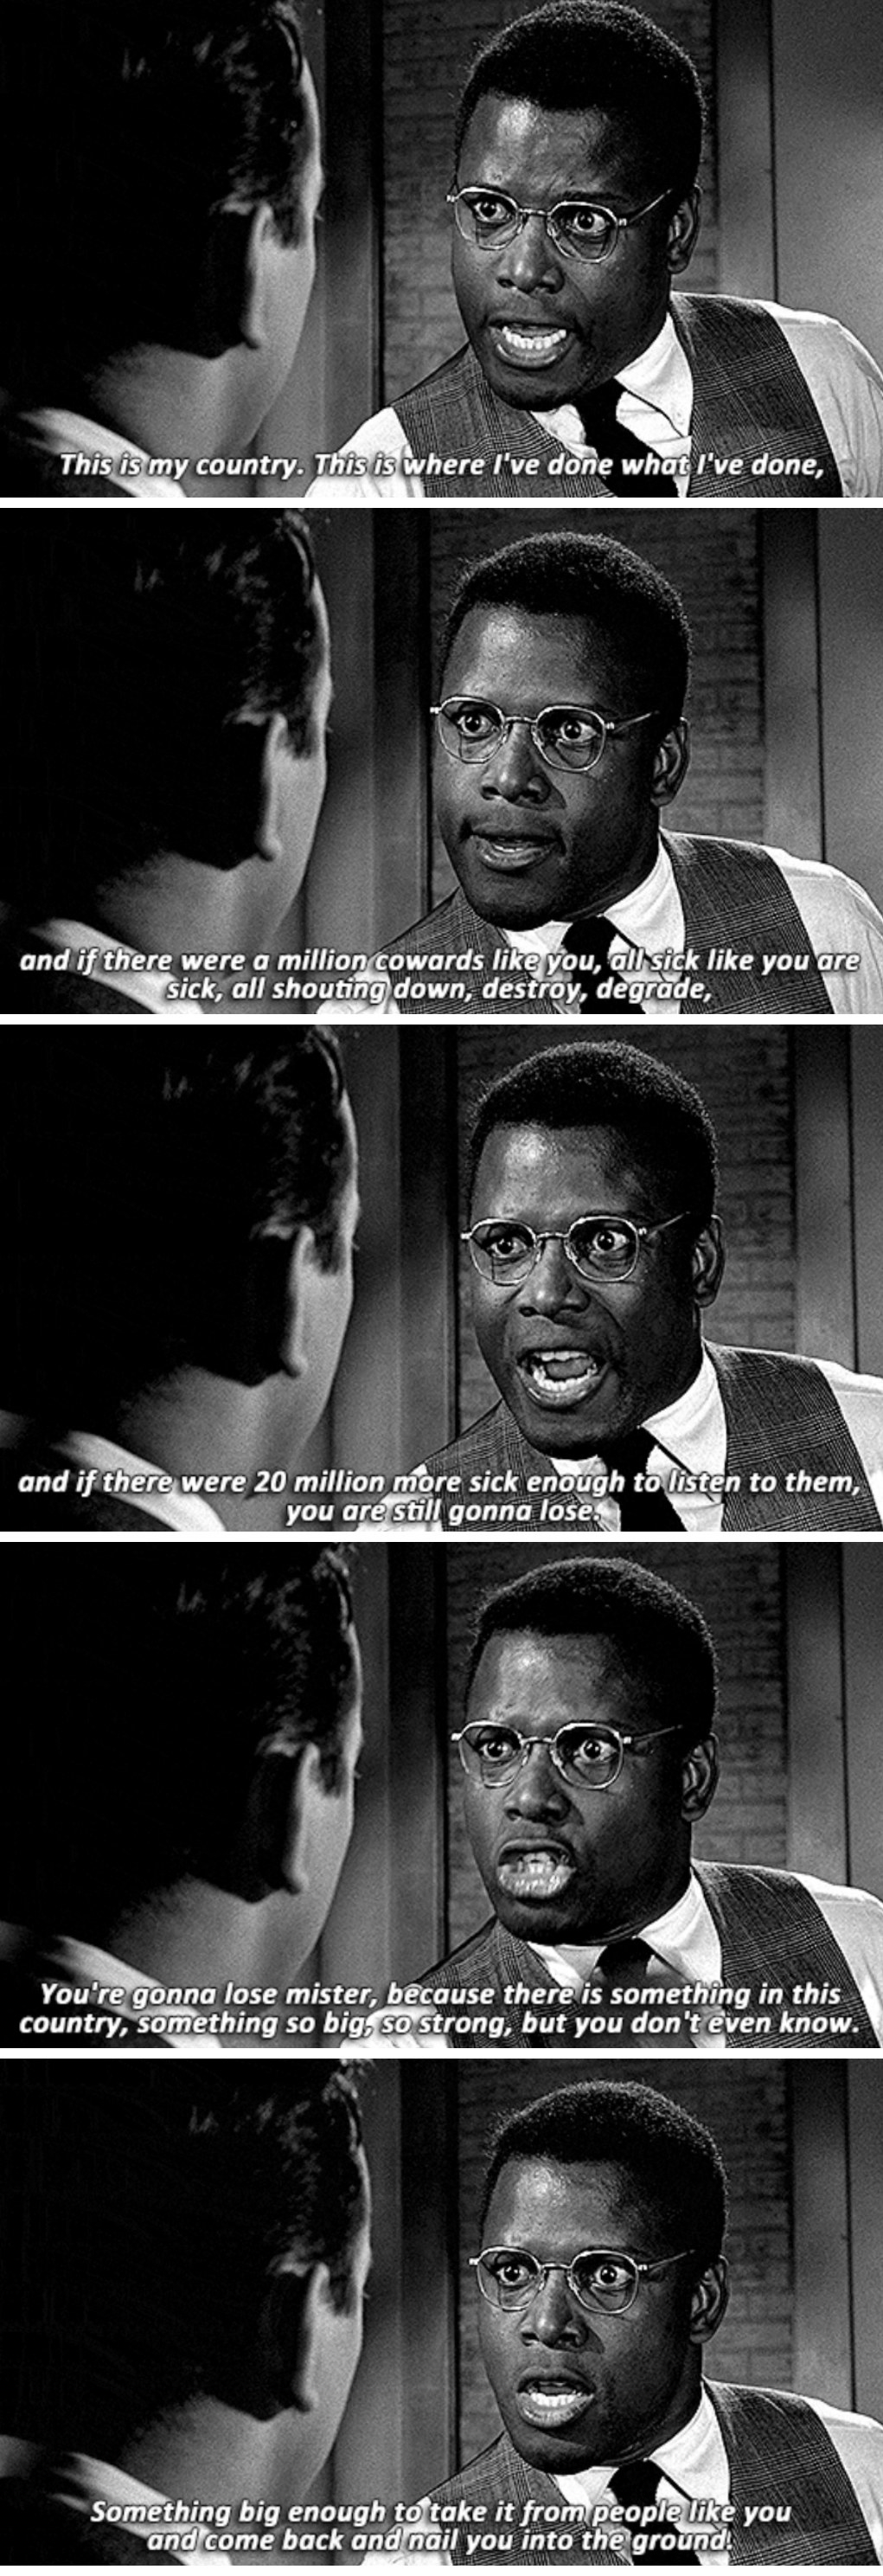 Sidney Poitier in &quot;Pressure Point,&quot; telling Bobby Darin&#x27;s racist, antisemitic character: &quot;You&#x27;re gonna lose mister, because there is something in this country, something so big, so strong, but you don&#x27;t even know&quot;